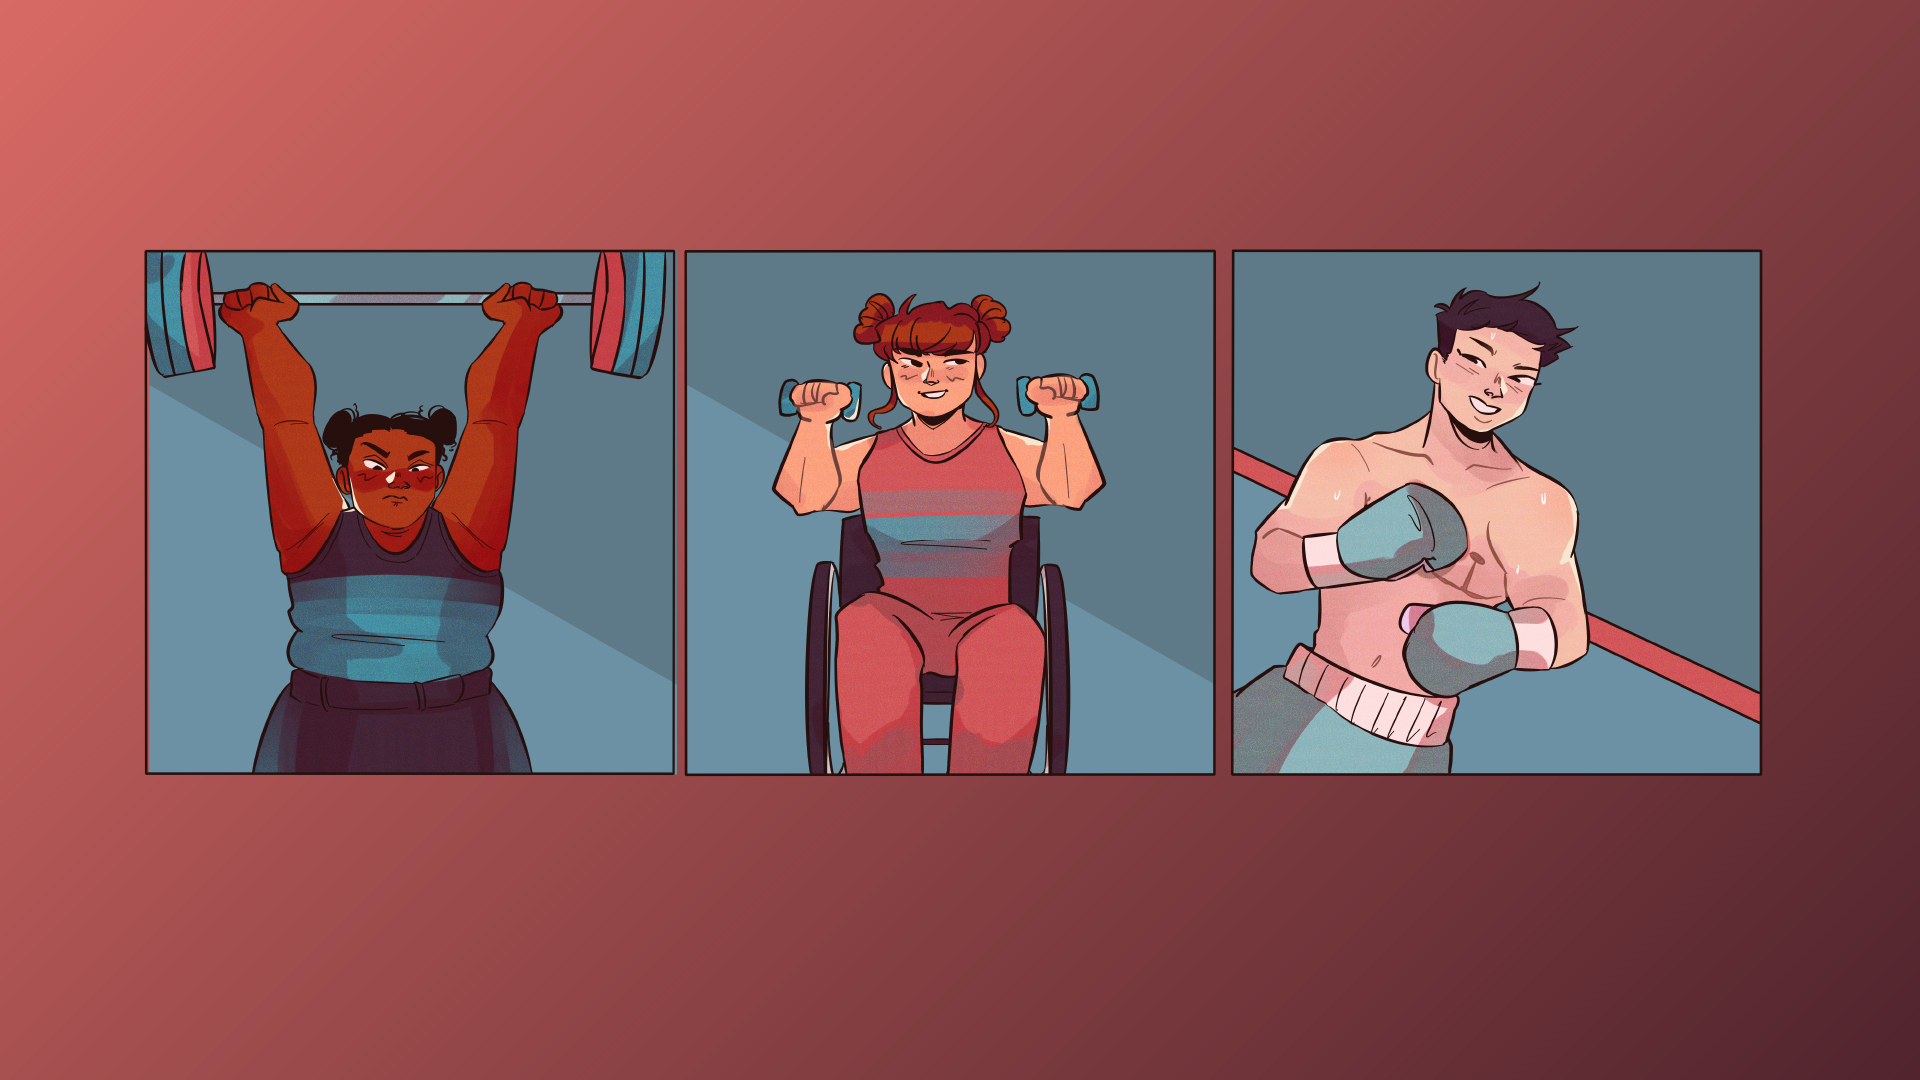 Illustration of a diverse group of people of different abilities working out.